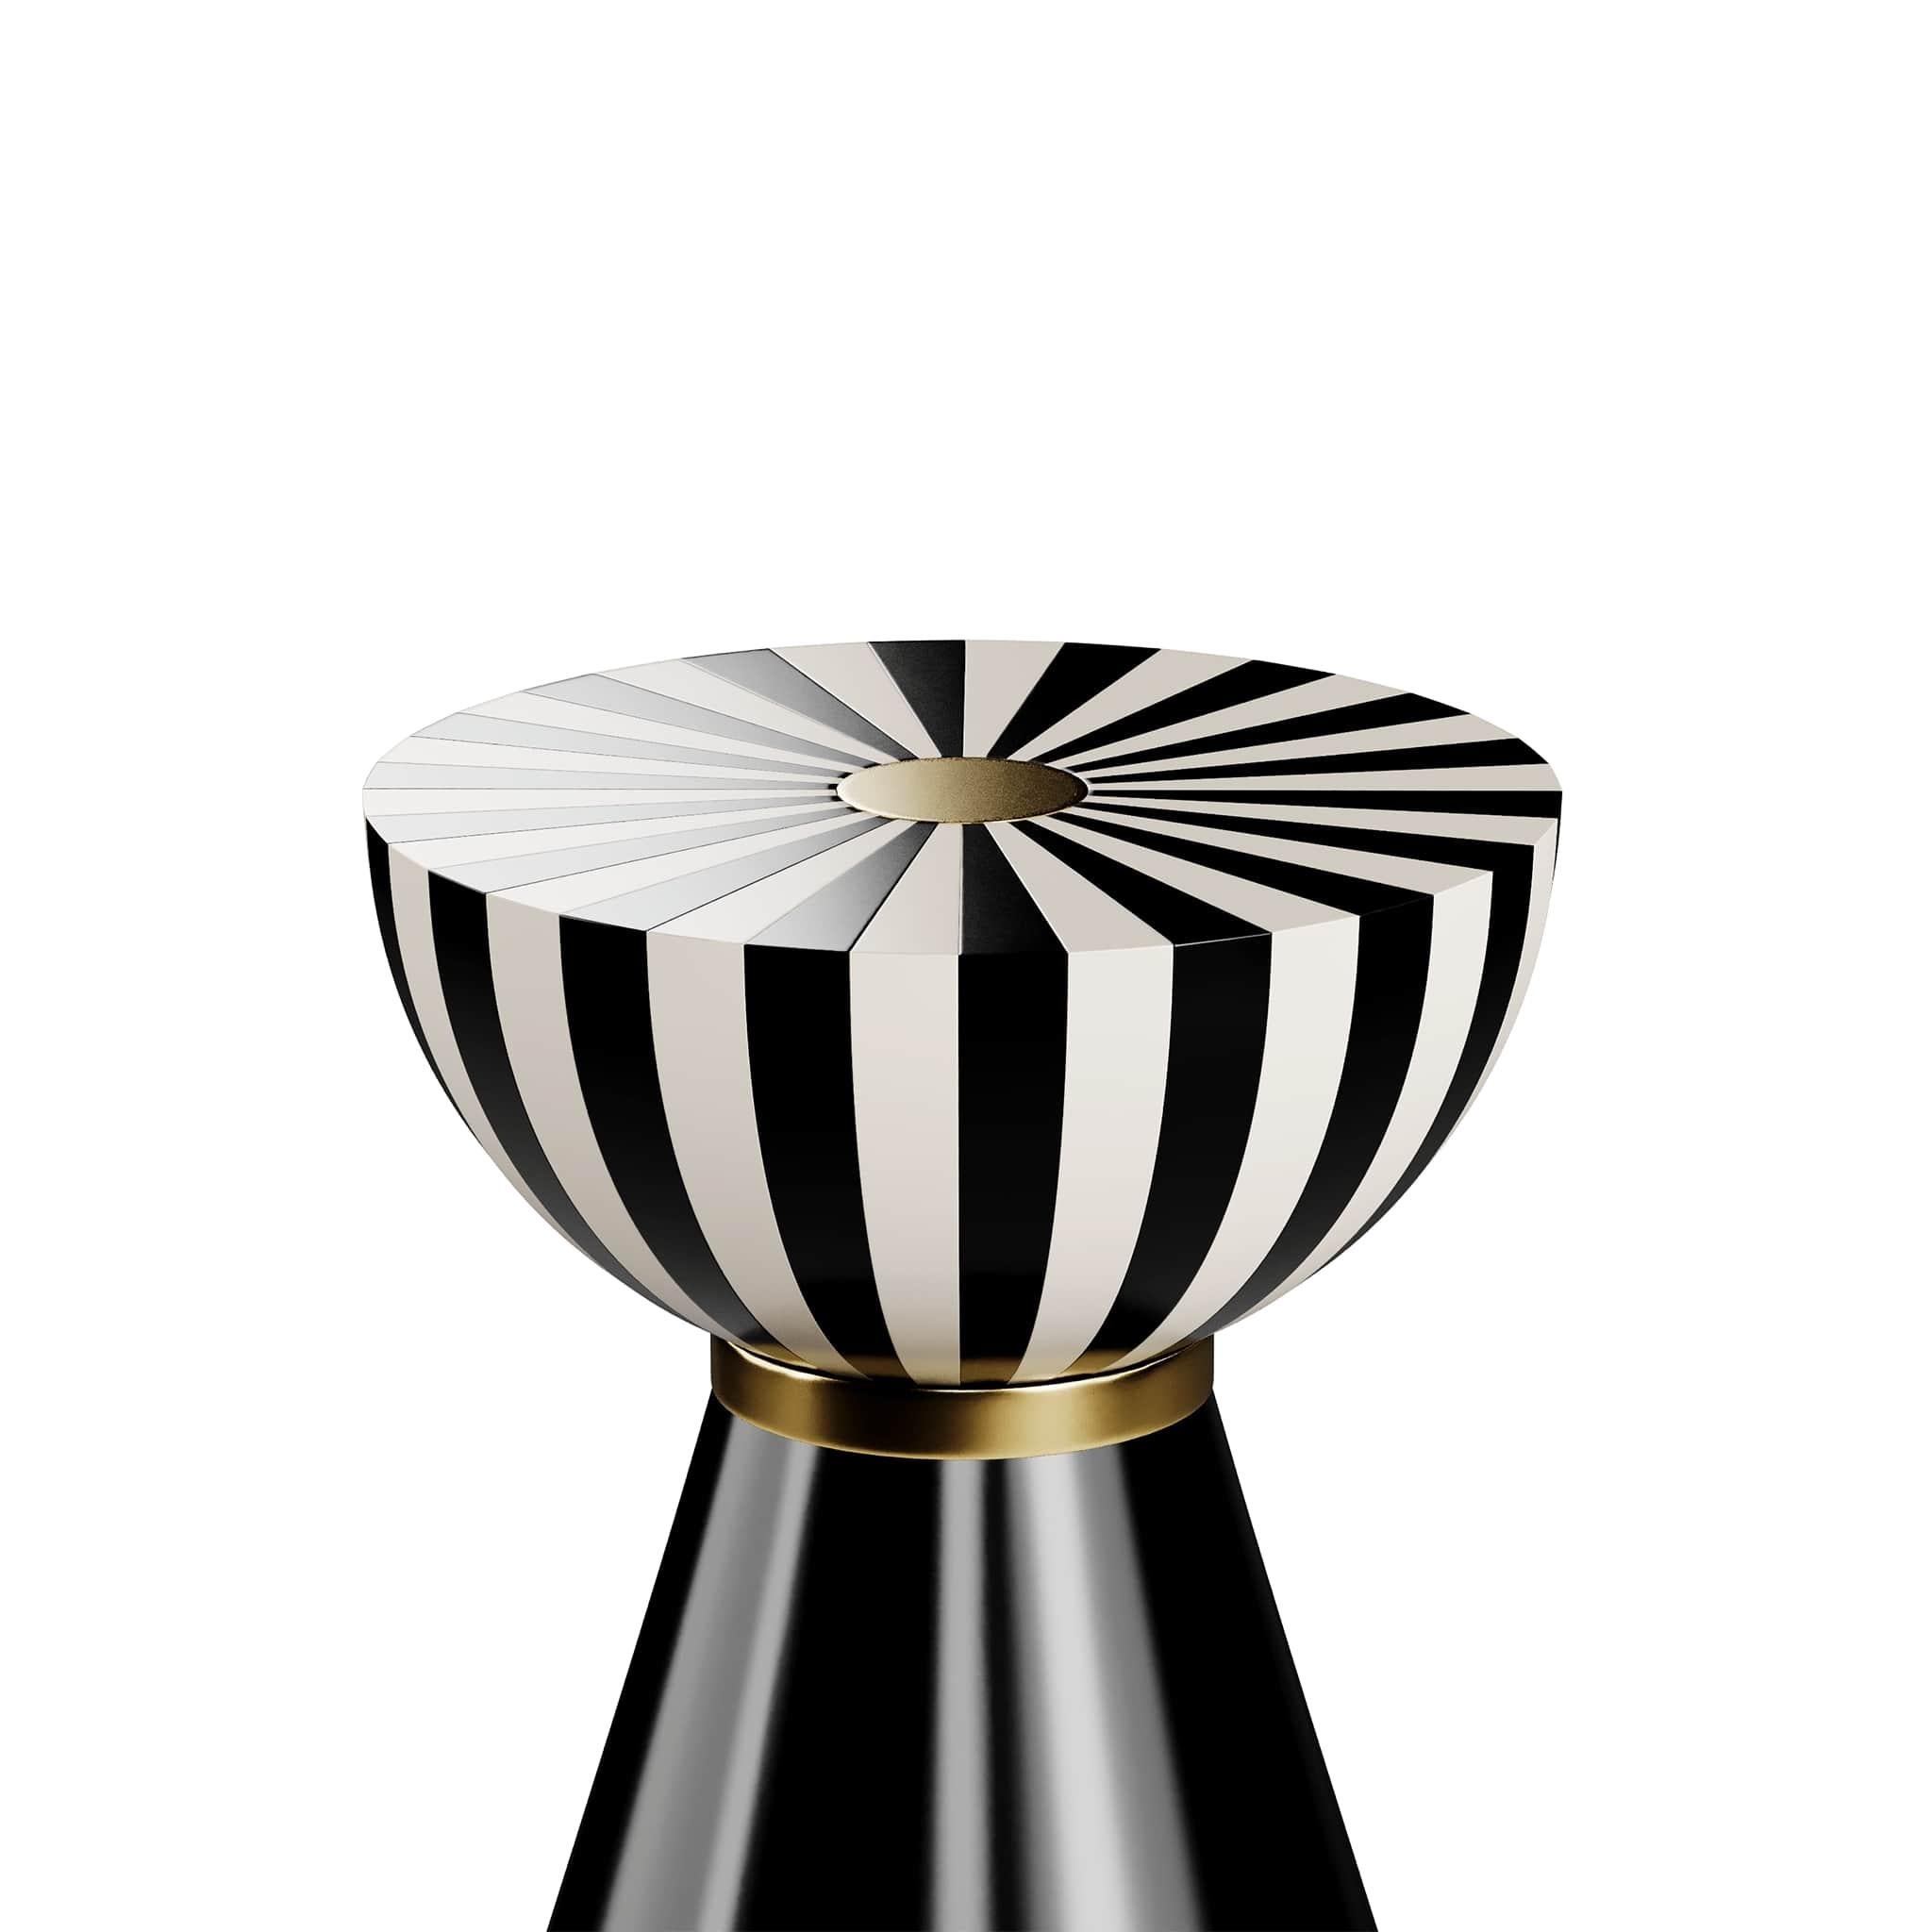 Modern round side table black & white top, gold stainless steel details

Fuschia II side table is the ideal cocktail table for living rooms with whimsical elegance. With layers of brave shapes and bold textures, Fuschia II is Postmodern design at